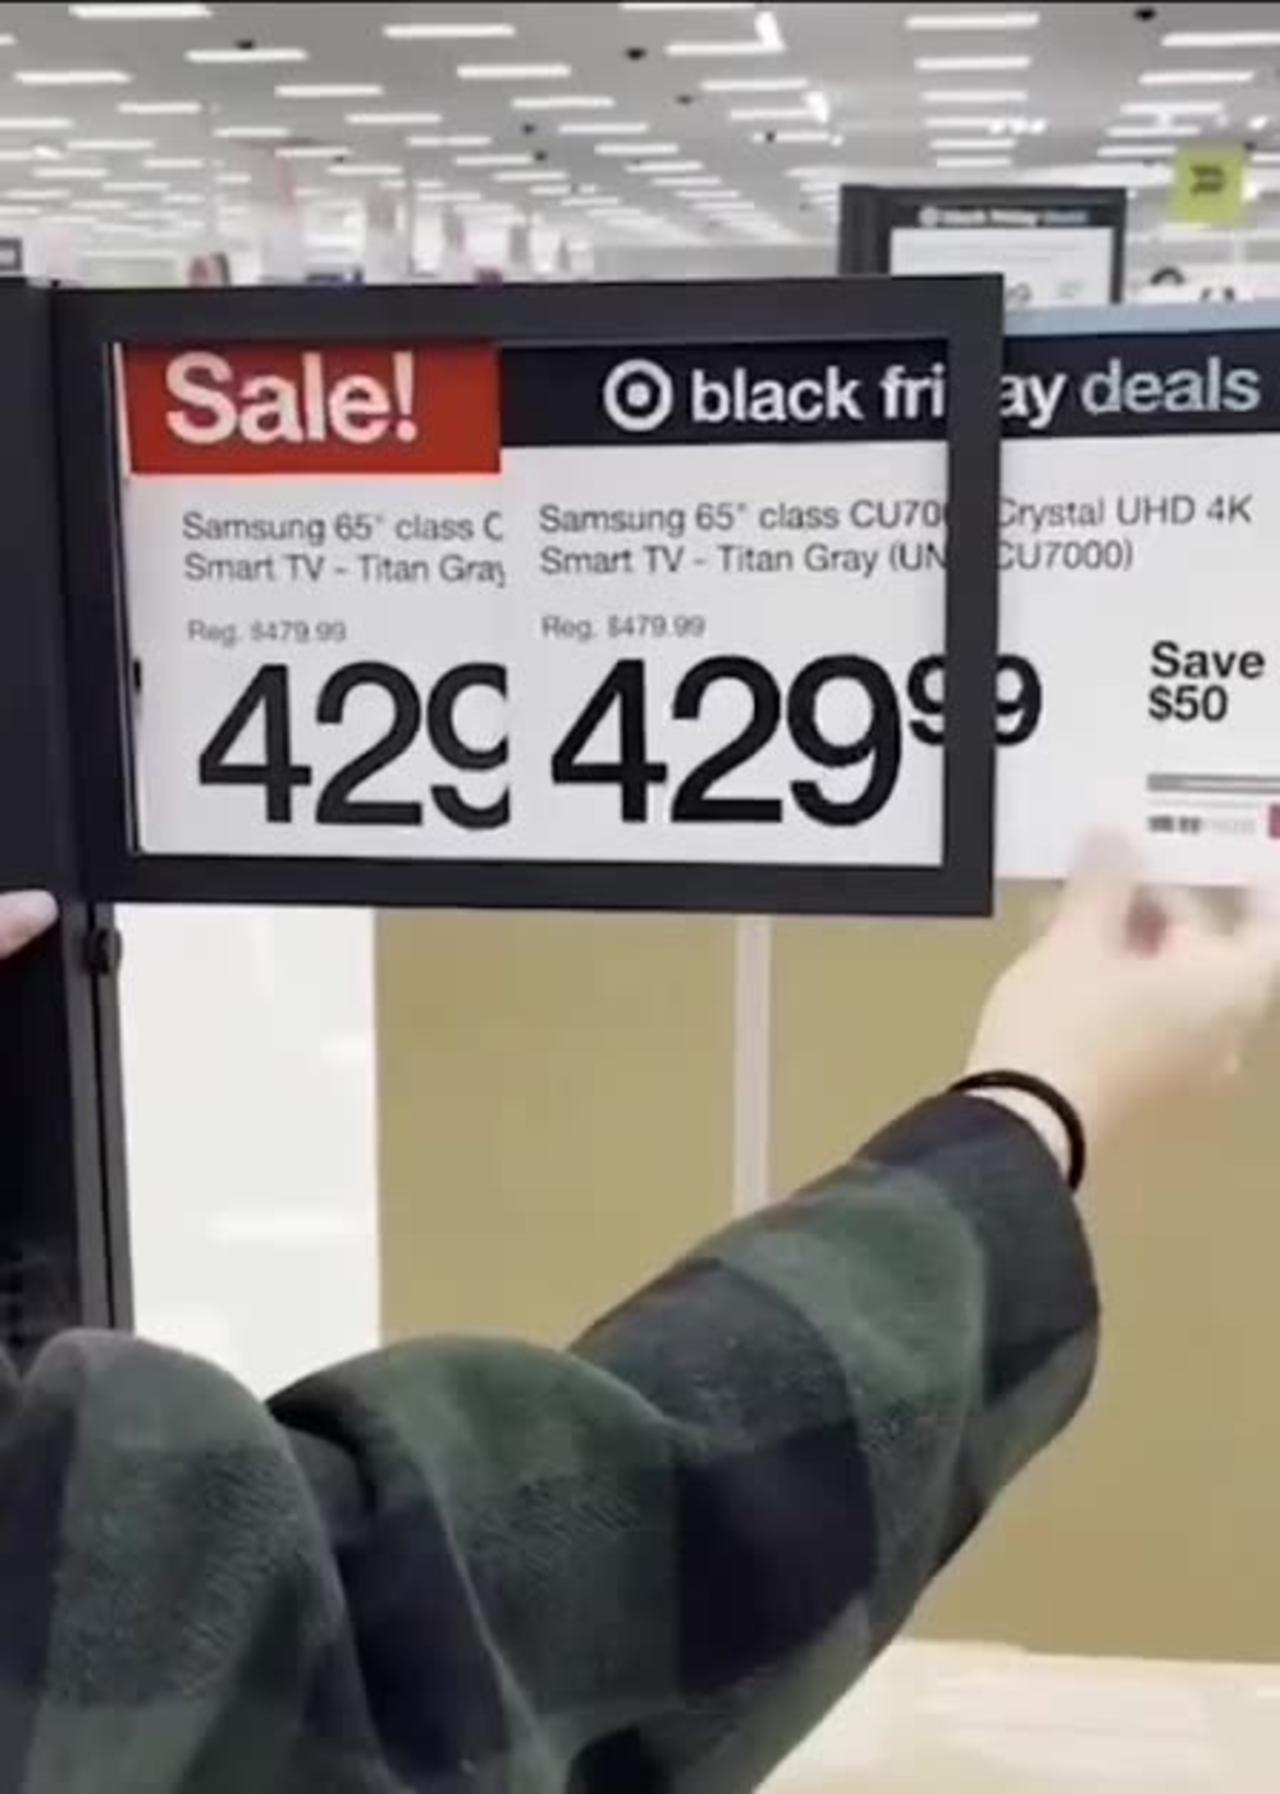 The whole point of Black Friday